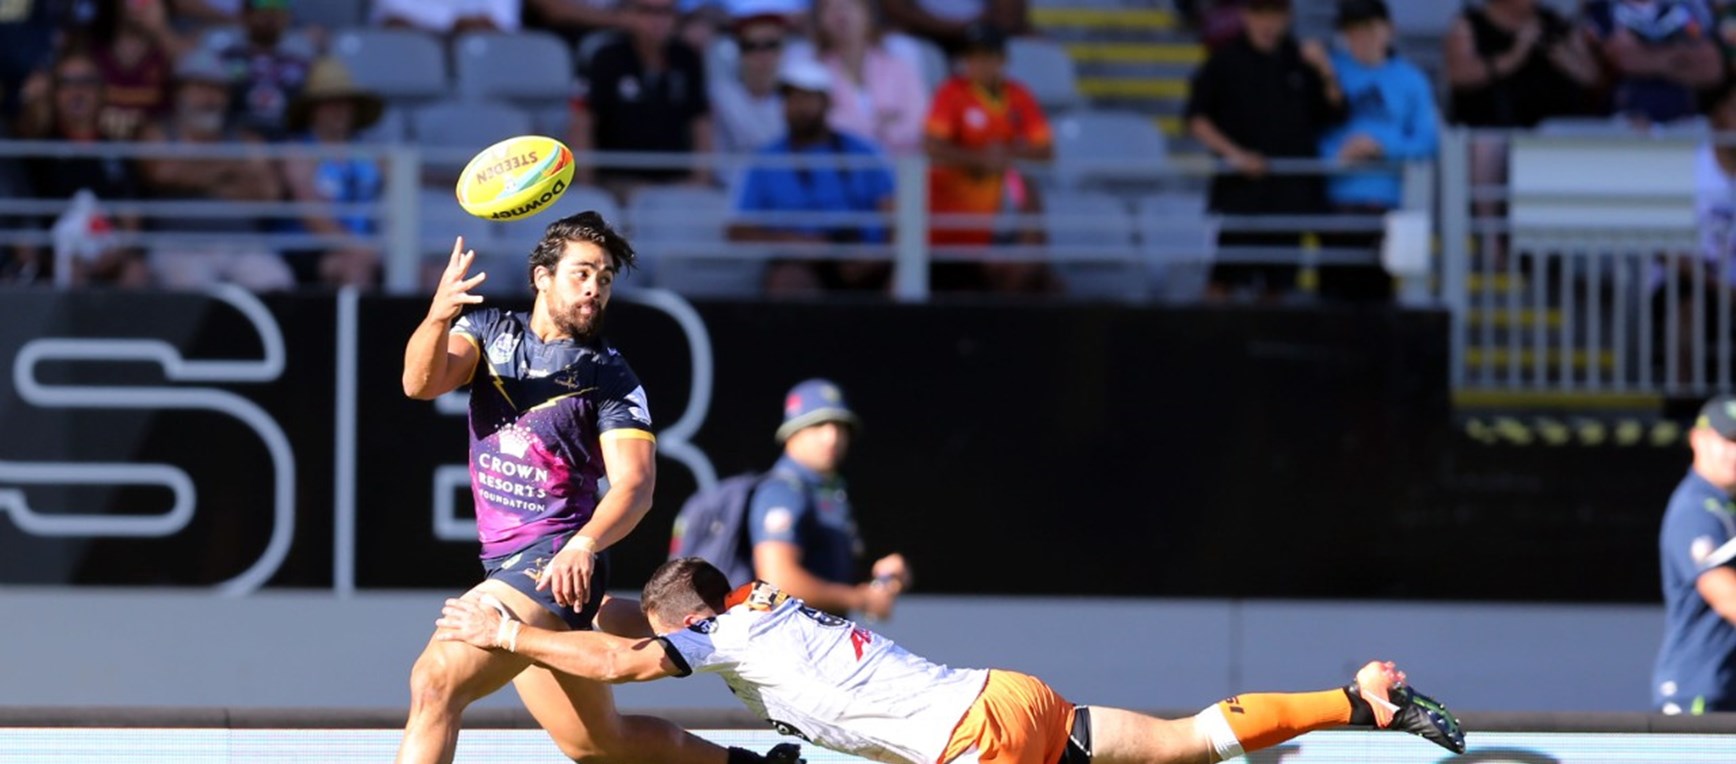 In pictures: Storm v Tigers